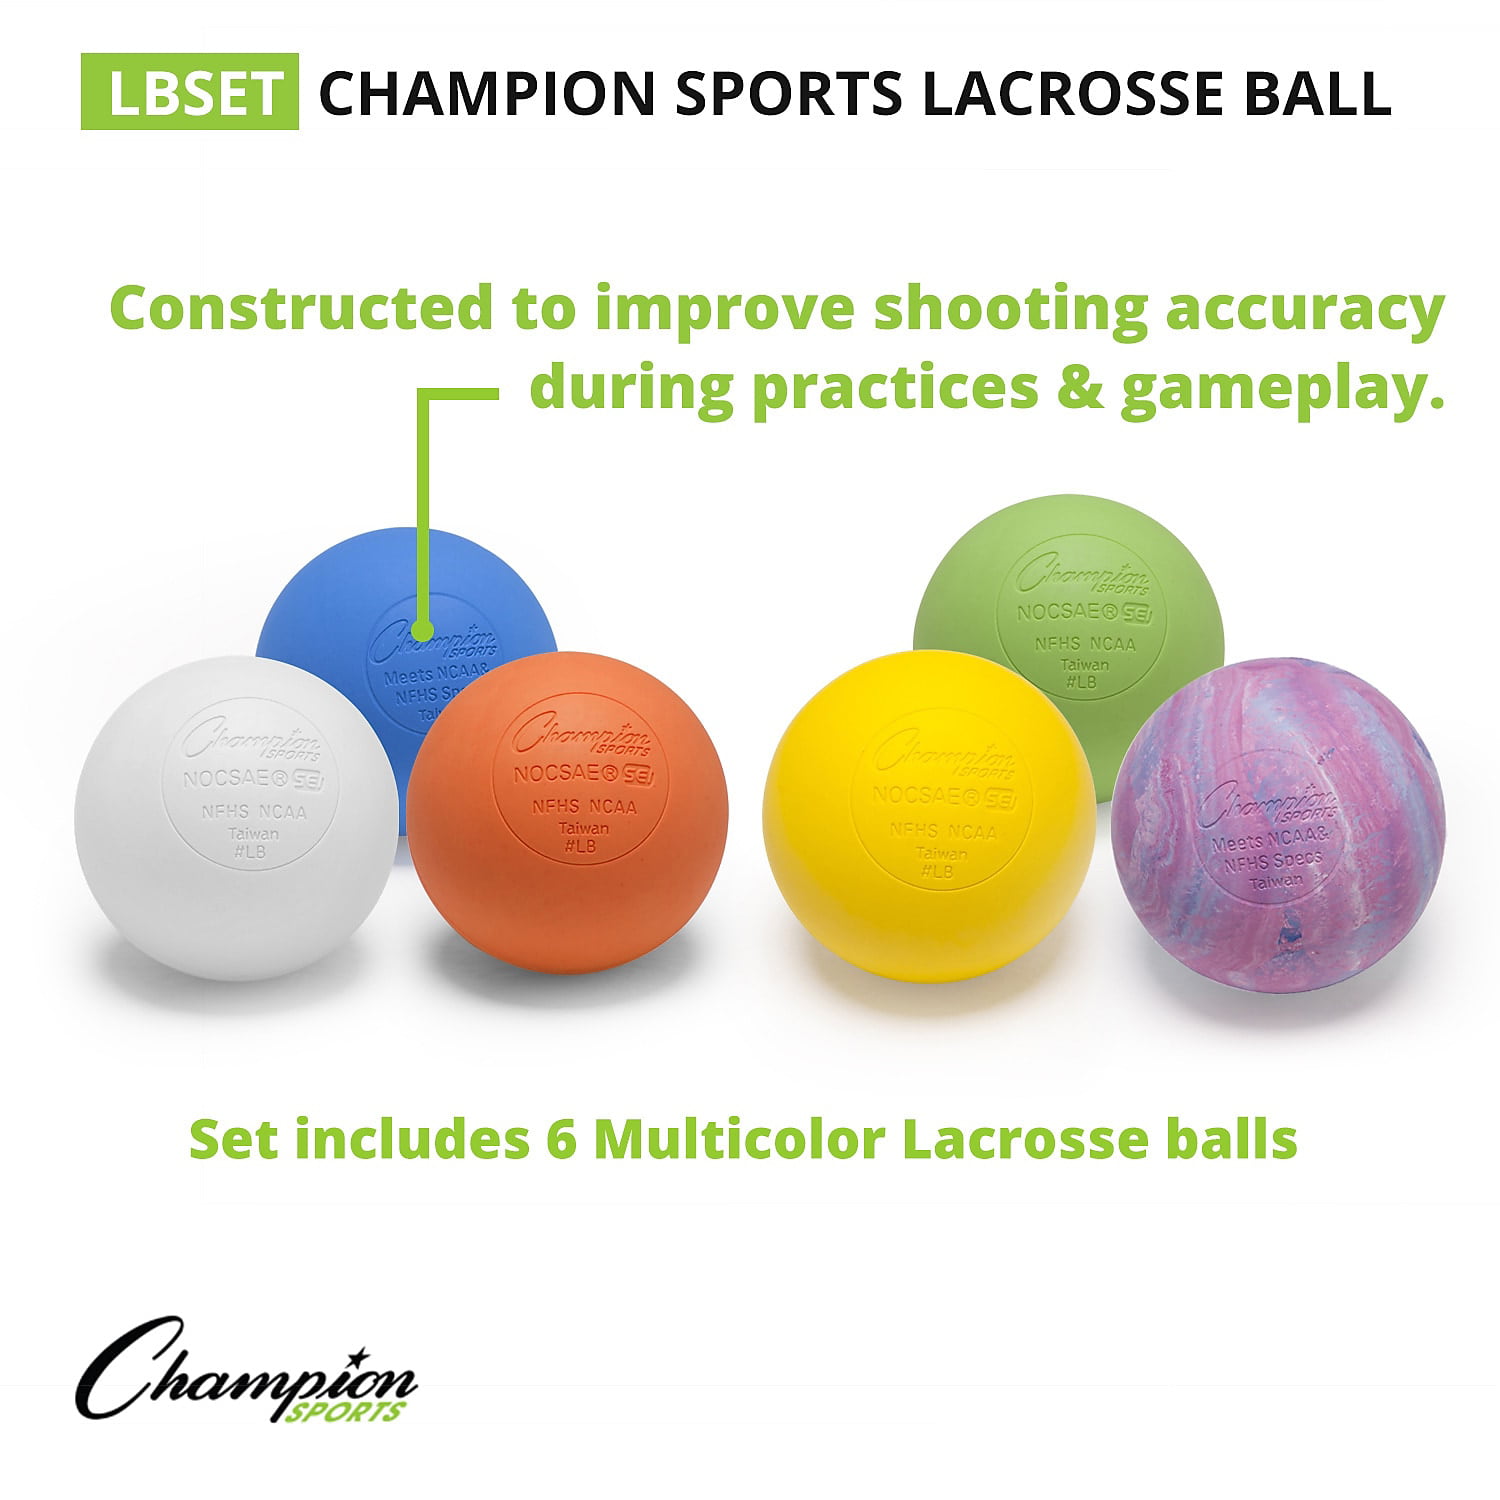 Lacrosse Balls Used  3 For $5 NOCSAE NCAA NFHS Certified Balls 